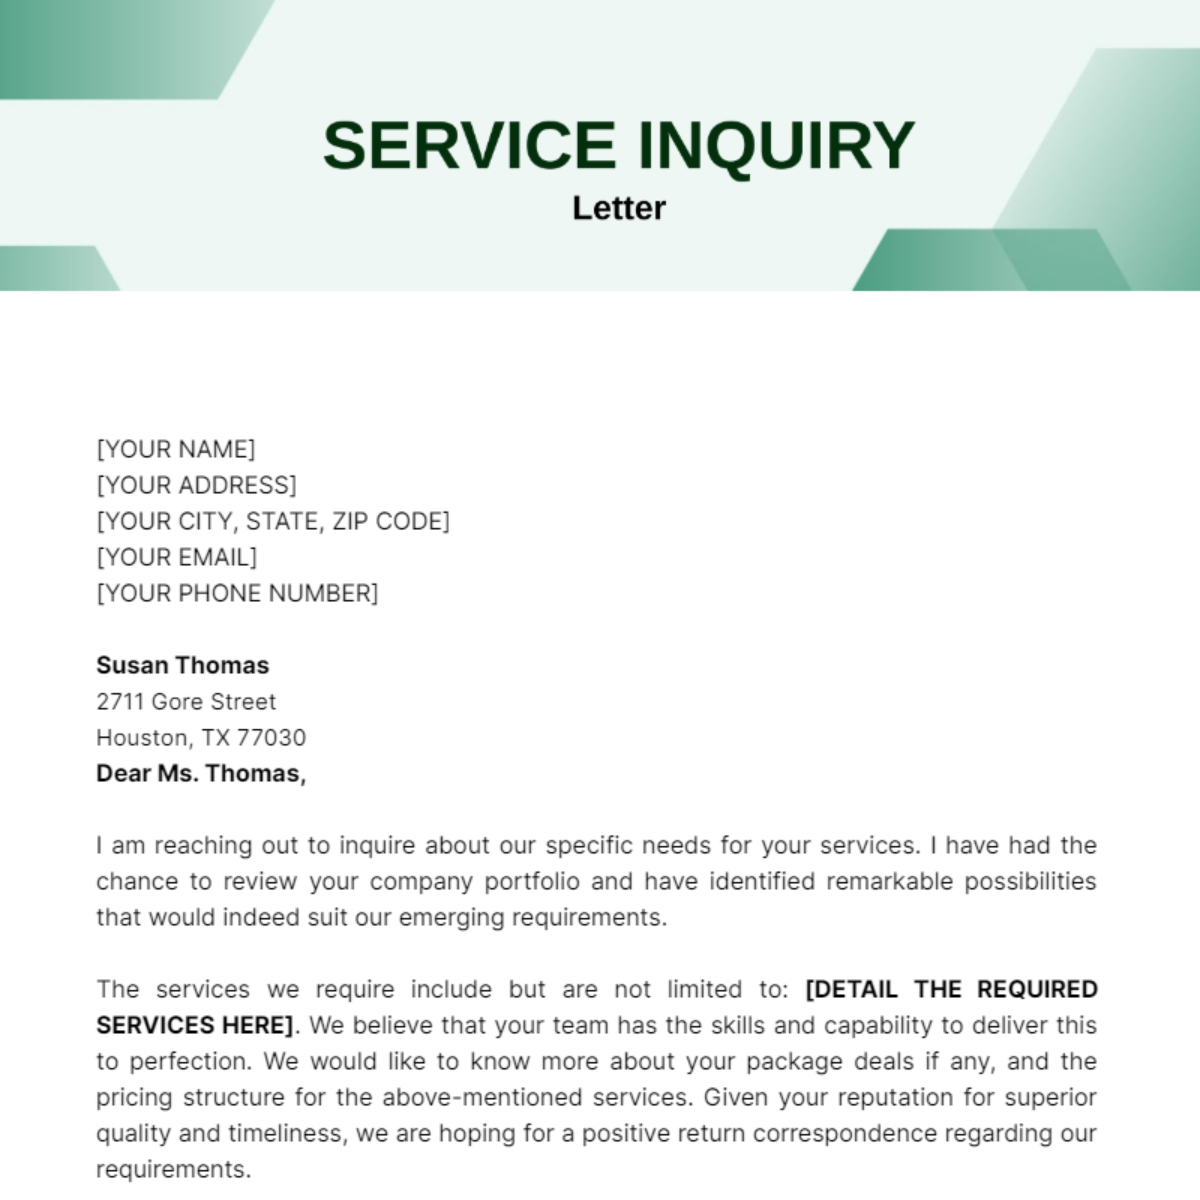 Service Inquiry Letter Template